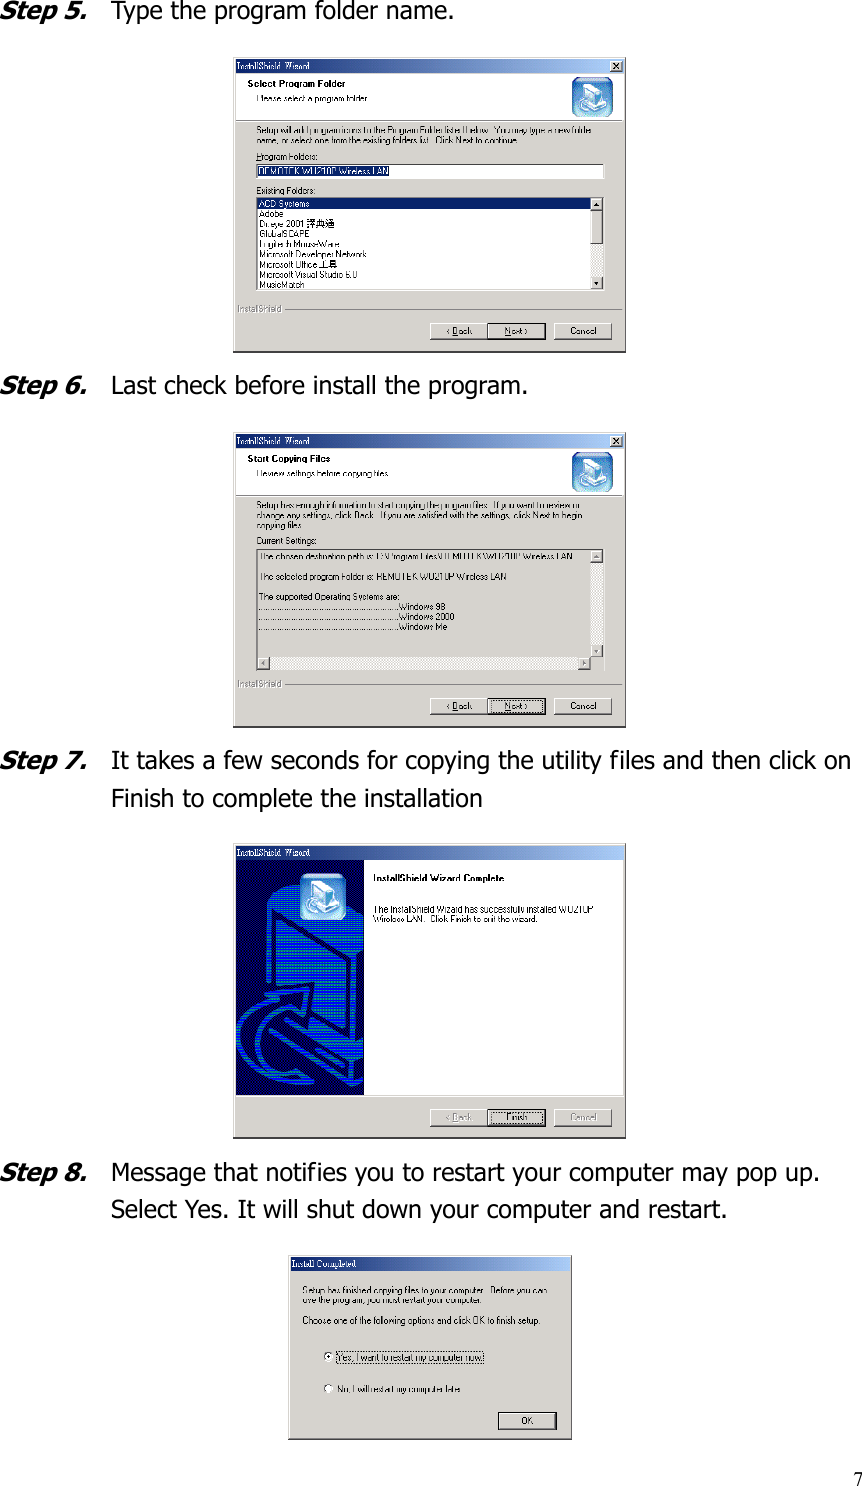  7Step 5. Type the program folder name. Step 6. Last check before install the program. Step 7. It takes a few seconds for copying the utility files and then click on Finish to complete the installation Step 8. Message that notifies you to restart your computer may pop up. Select Yes. It will shut down your computer and restart.    